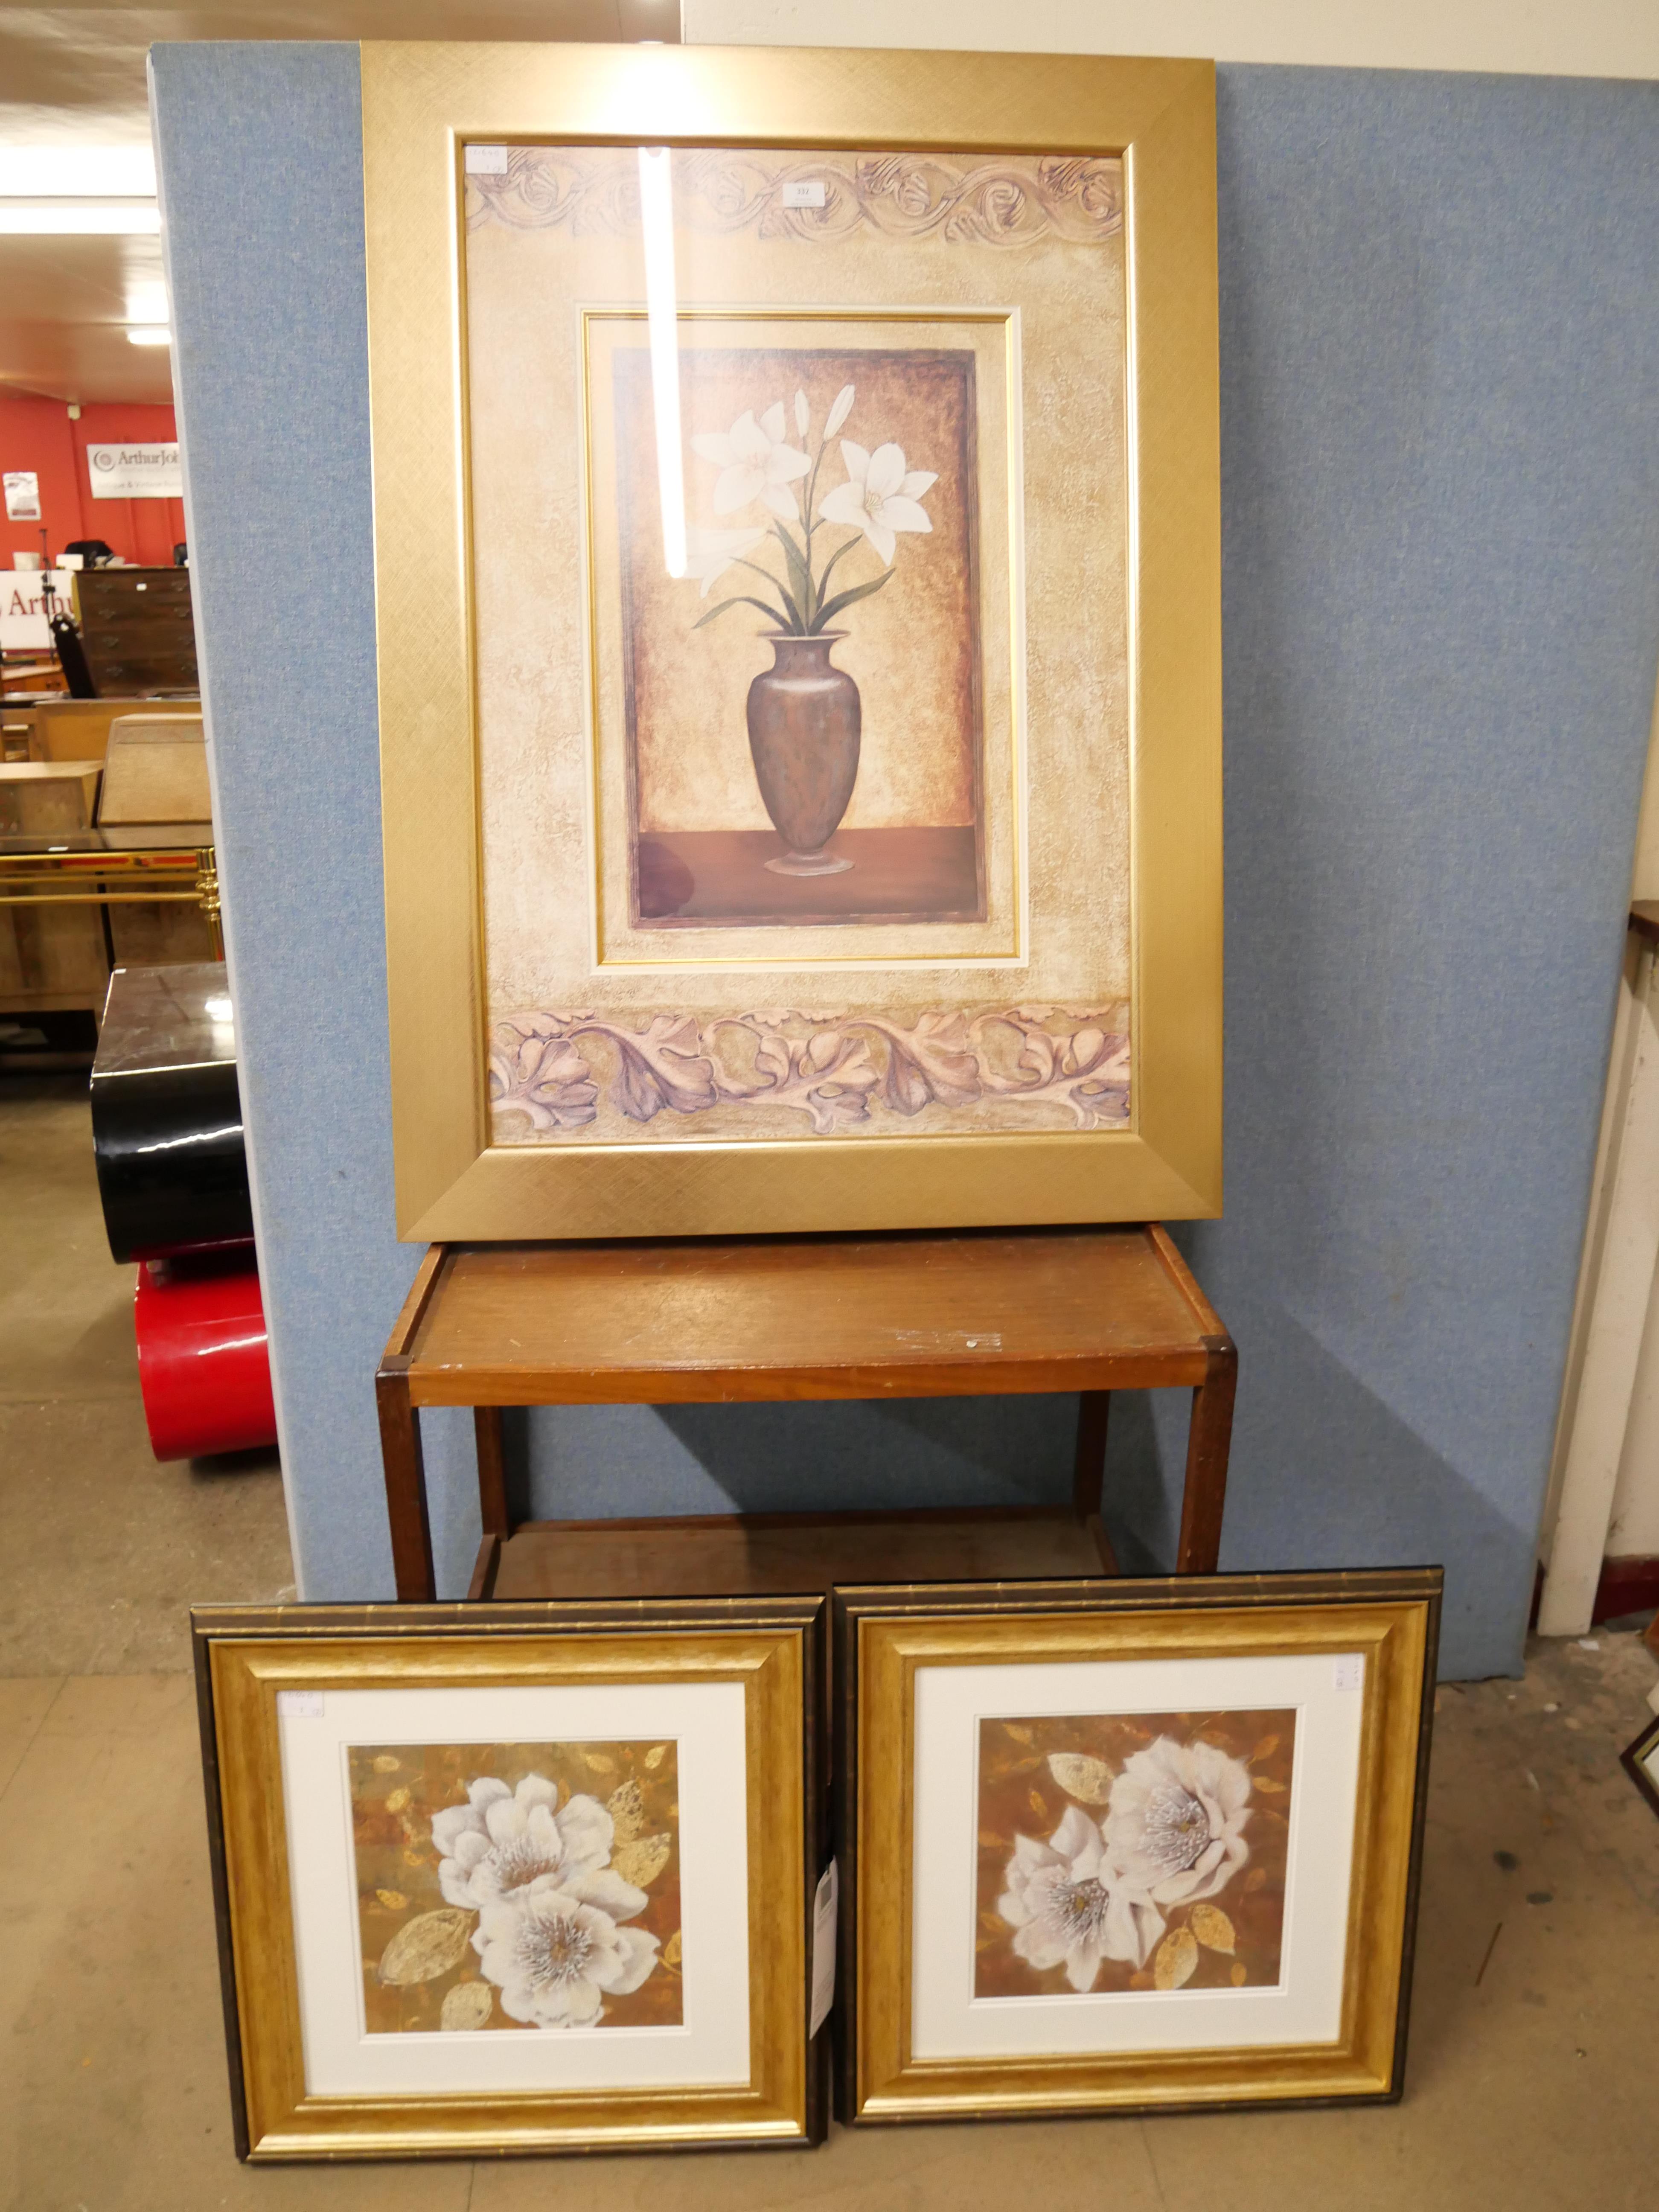 A large still life print and two others, all framed